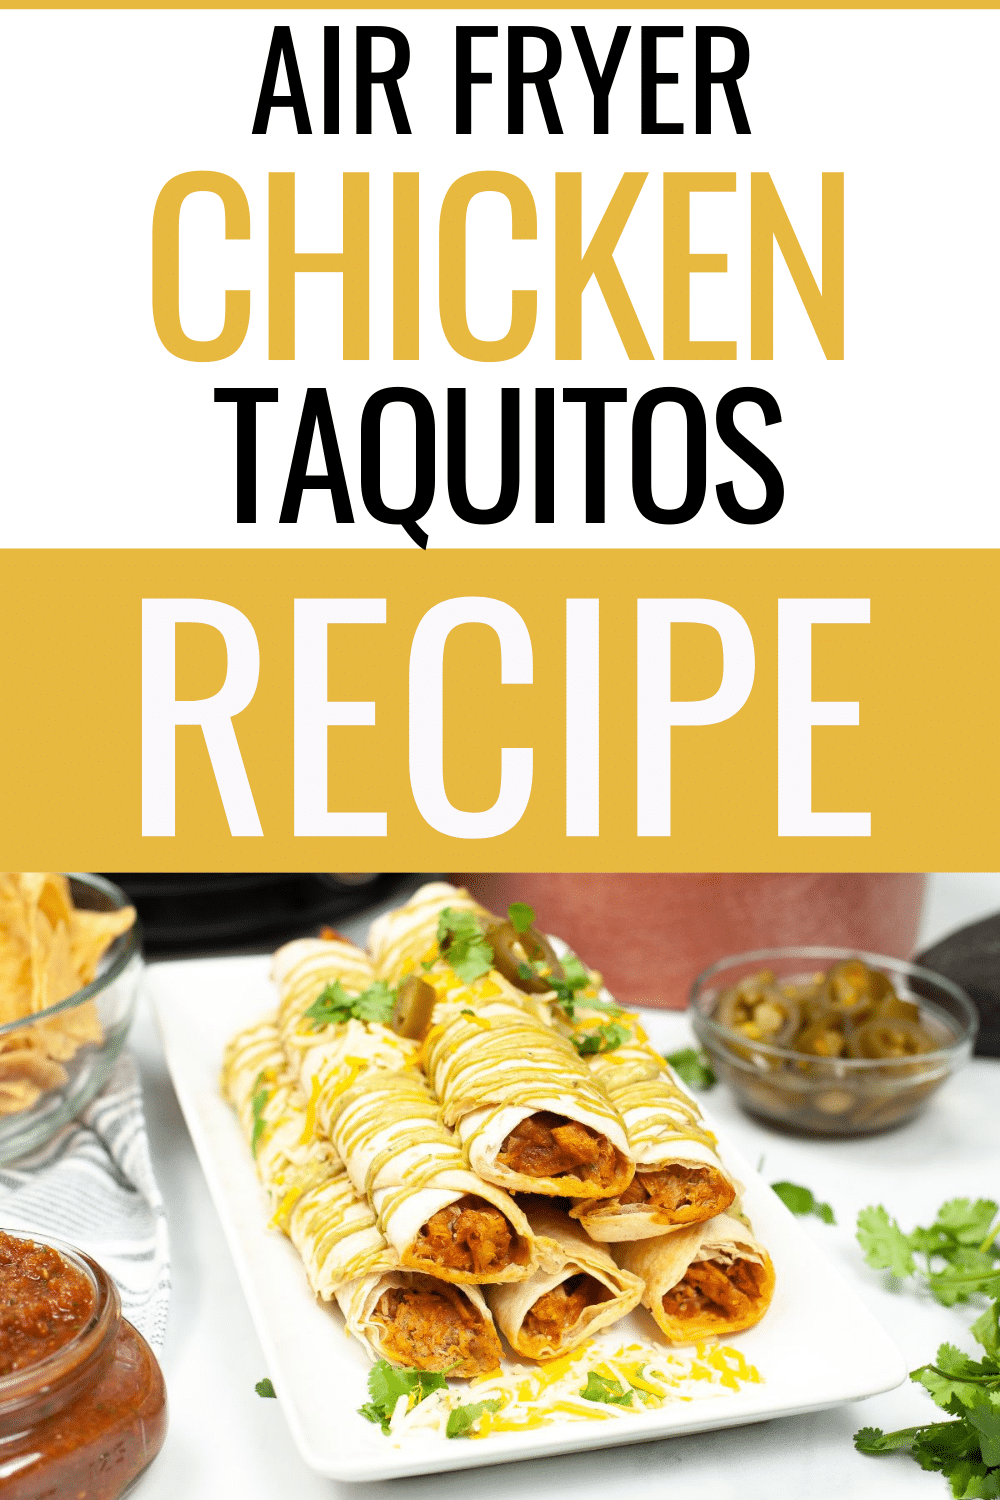 Air Fryer Chicken Taquitos at the bottom of the image and a text at the top part of the image saying "Air Fryer Chicken Taquitos Recipe".